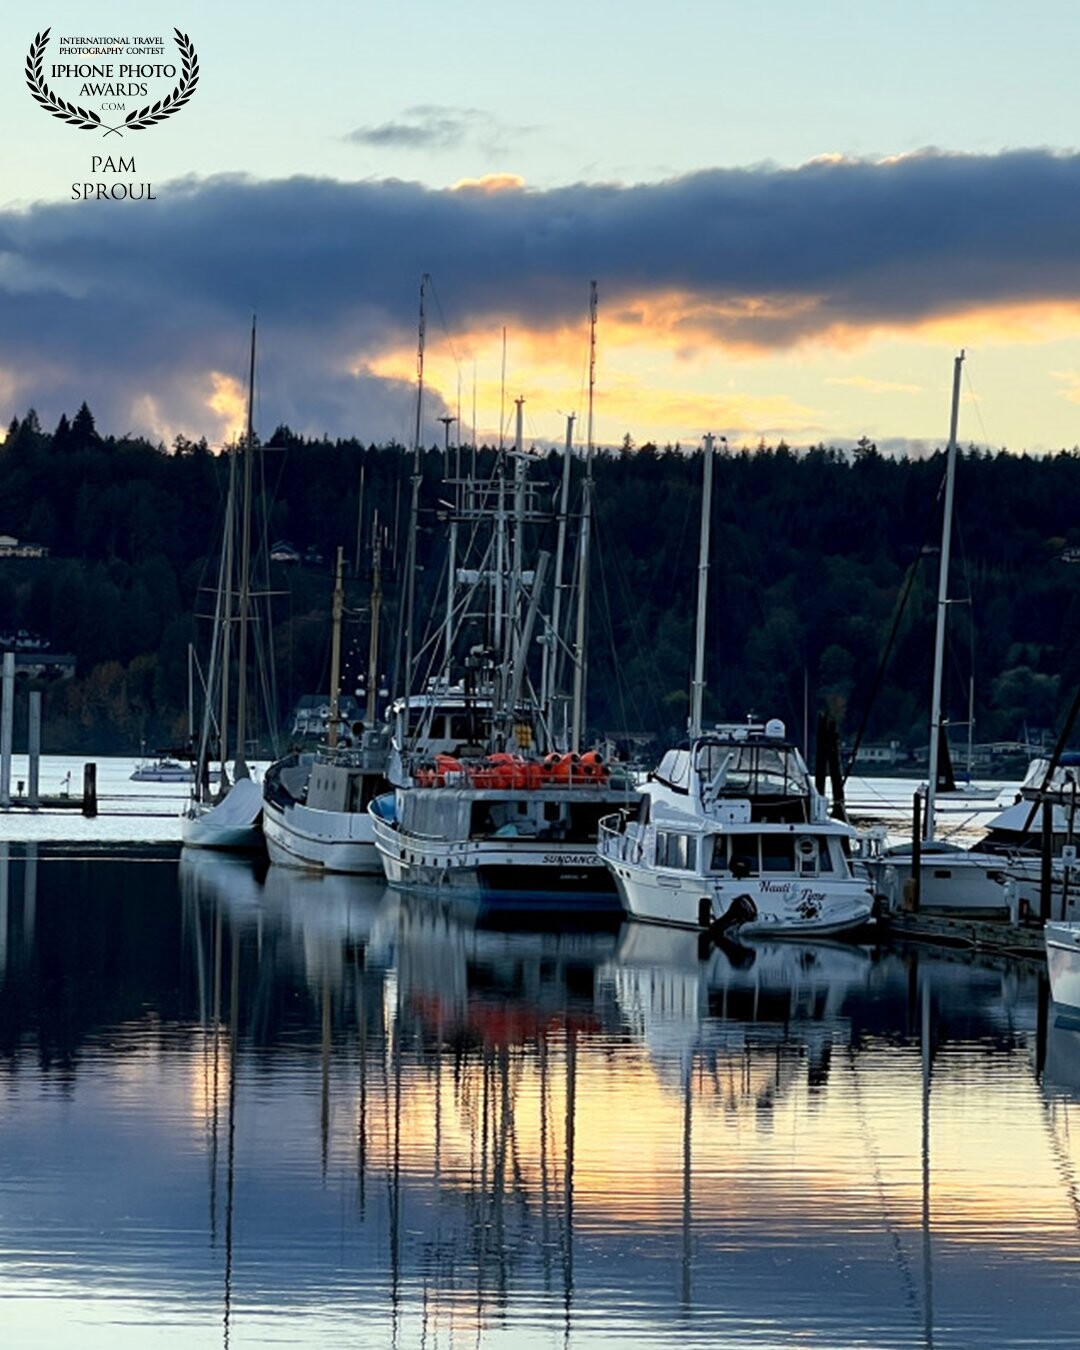 Took a chance and went down to the harbor hoping that the sky was developing and turned to my right and saw these beautiful boats sitting amidst the reflections of the sky ~ day made <br />
#liberty bay harbor sky -2022